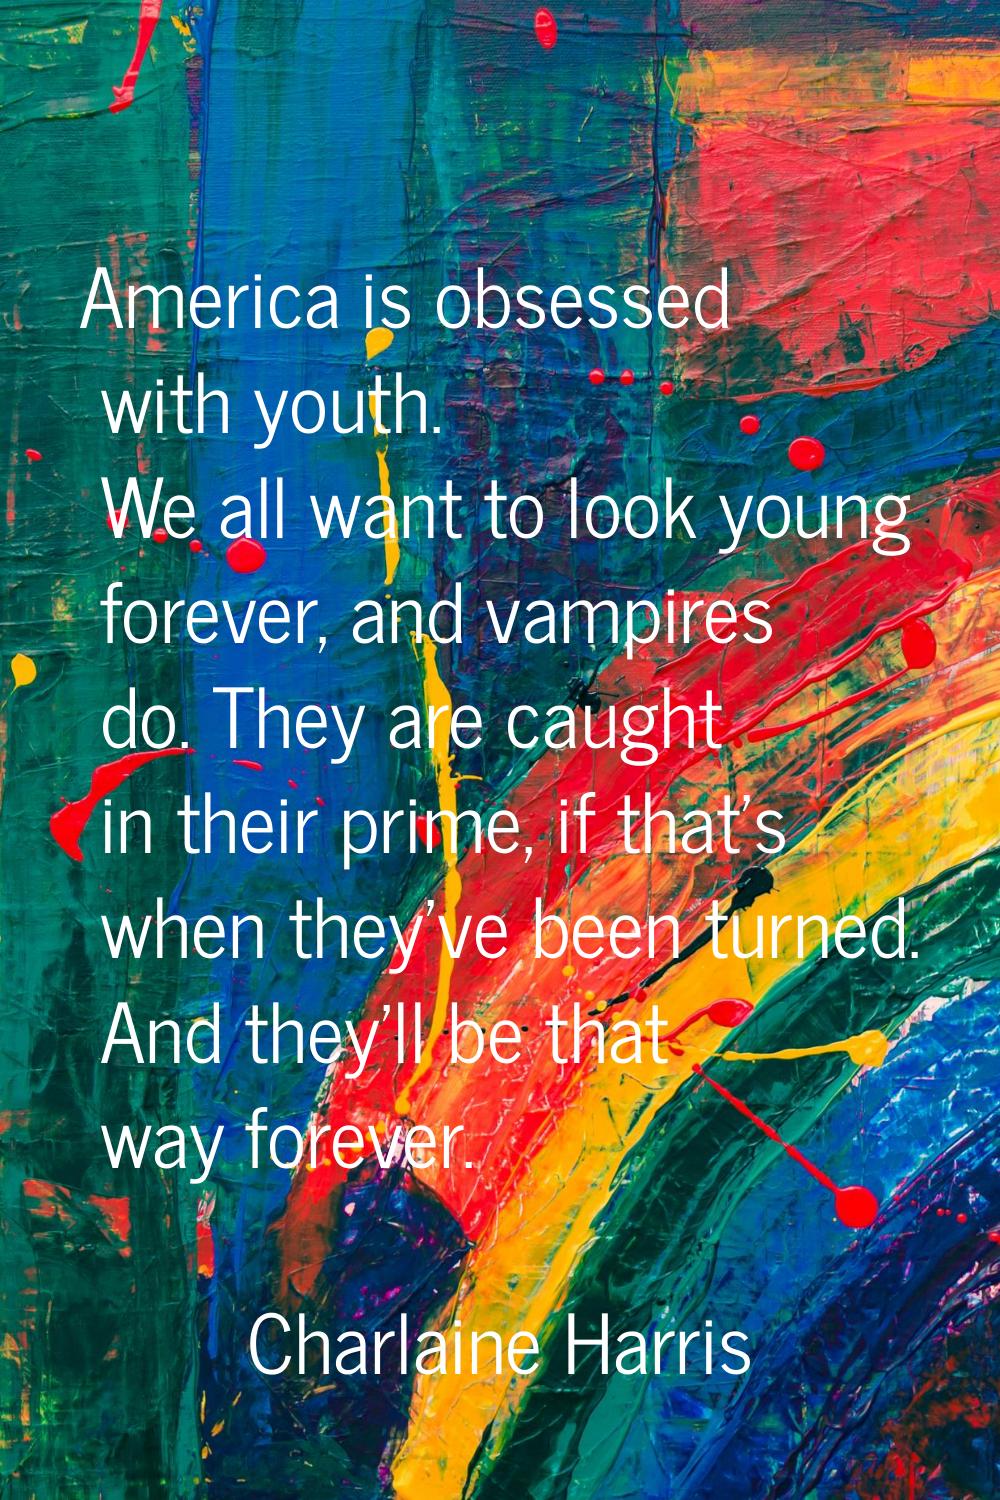 America is obsessed with youth. We all want to look young forever, and vampires do. They are caught